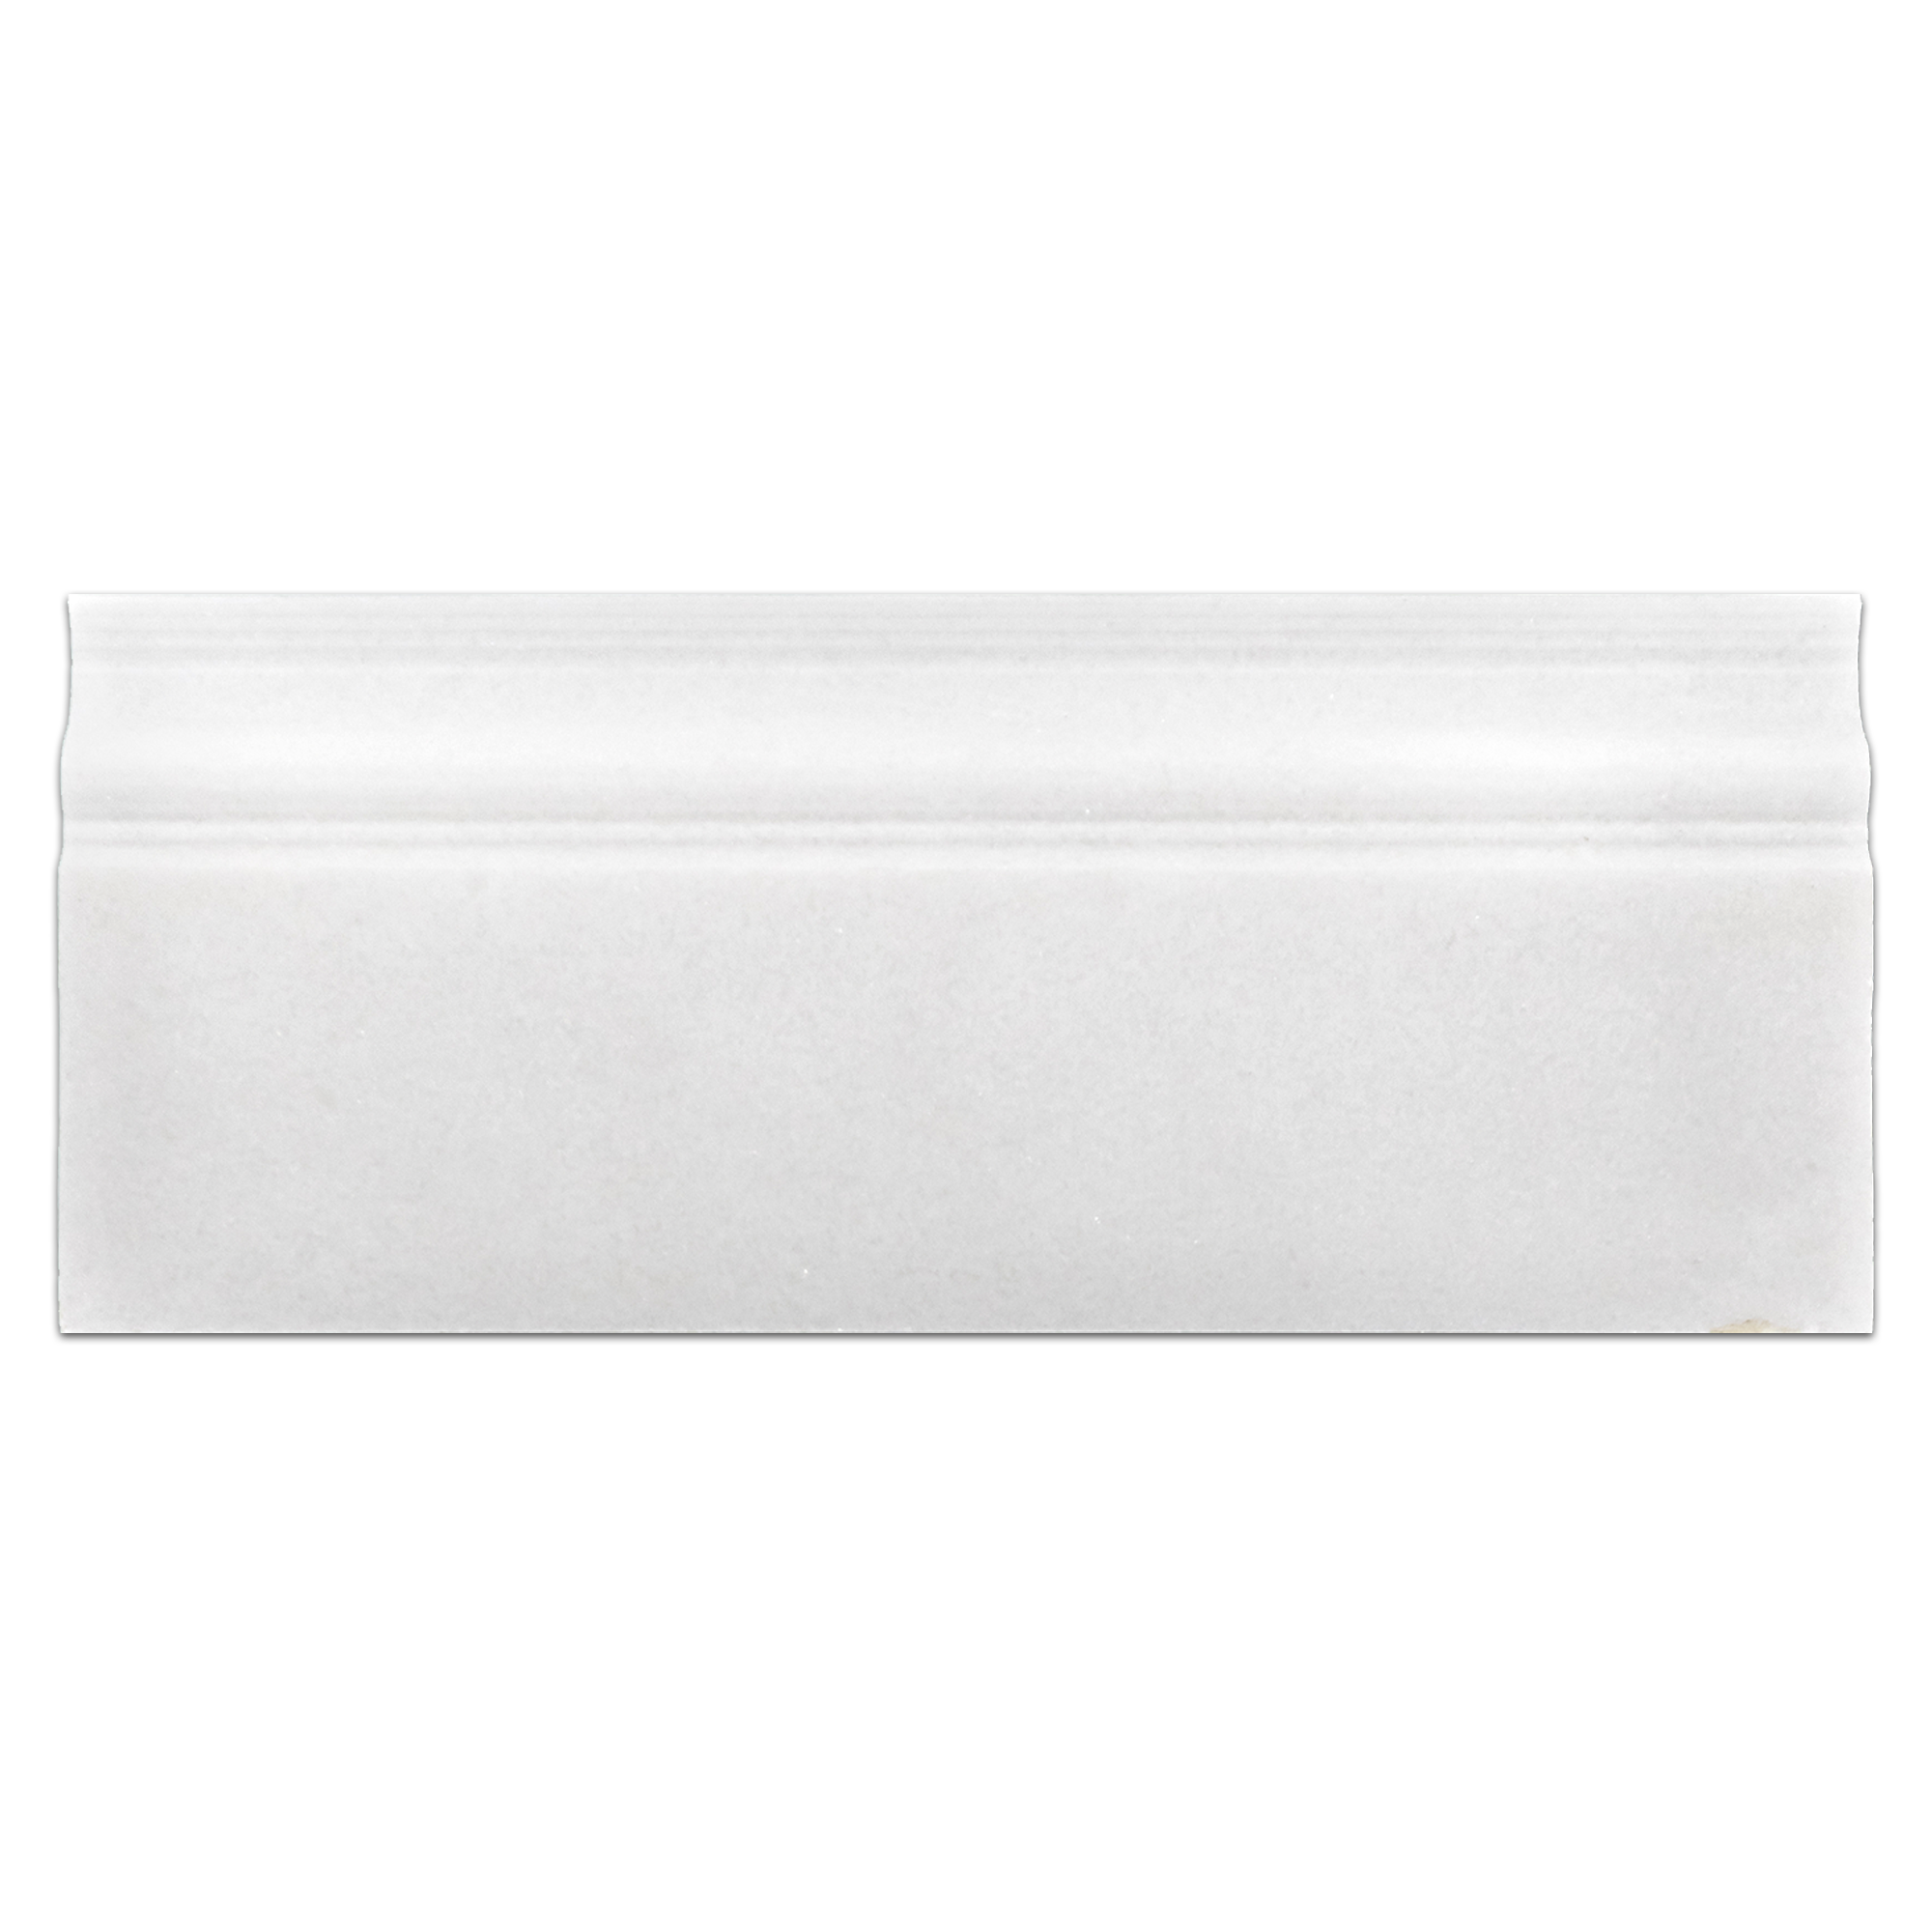 Elon White Thassos Marble Baseboard 4.75x12 Honed - Surface Group International Product